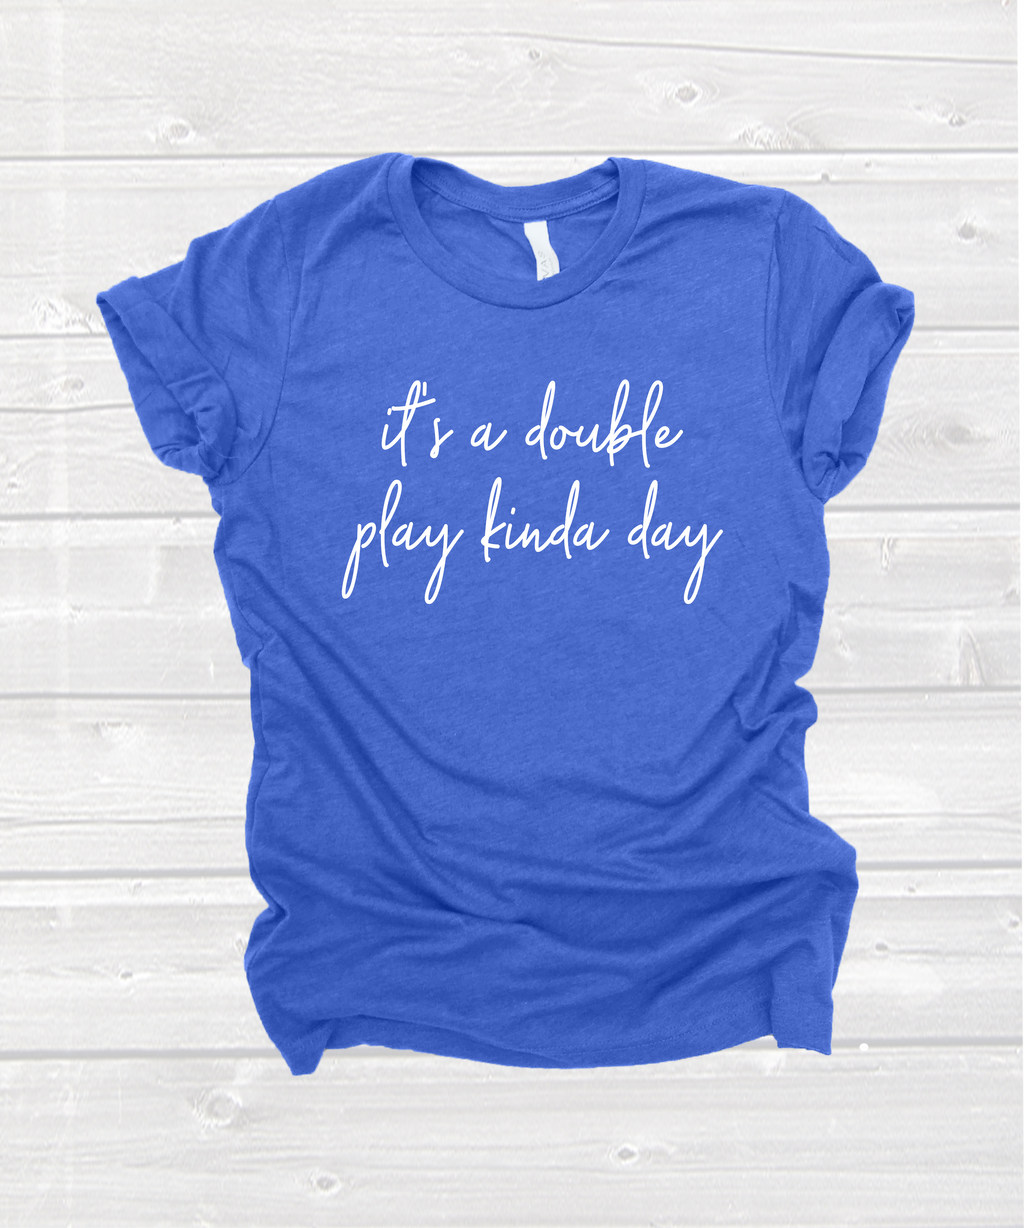 "it's a double play kinda day" tee in heather blue